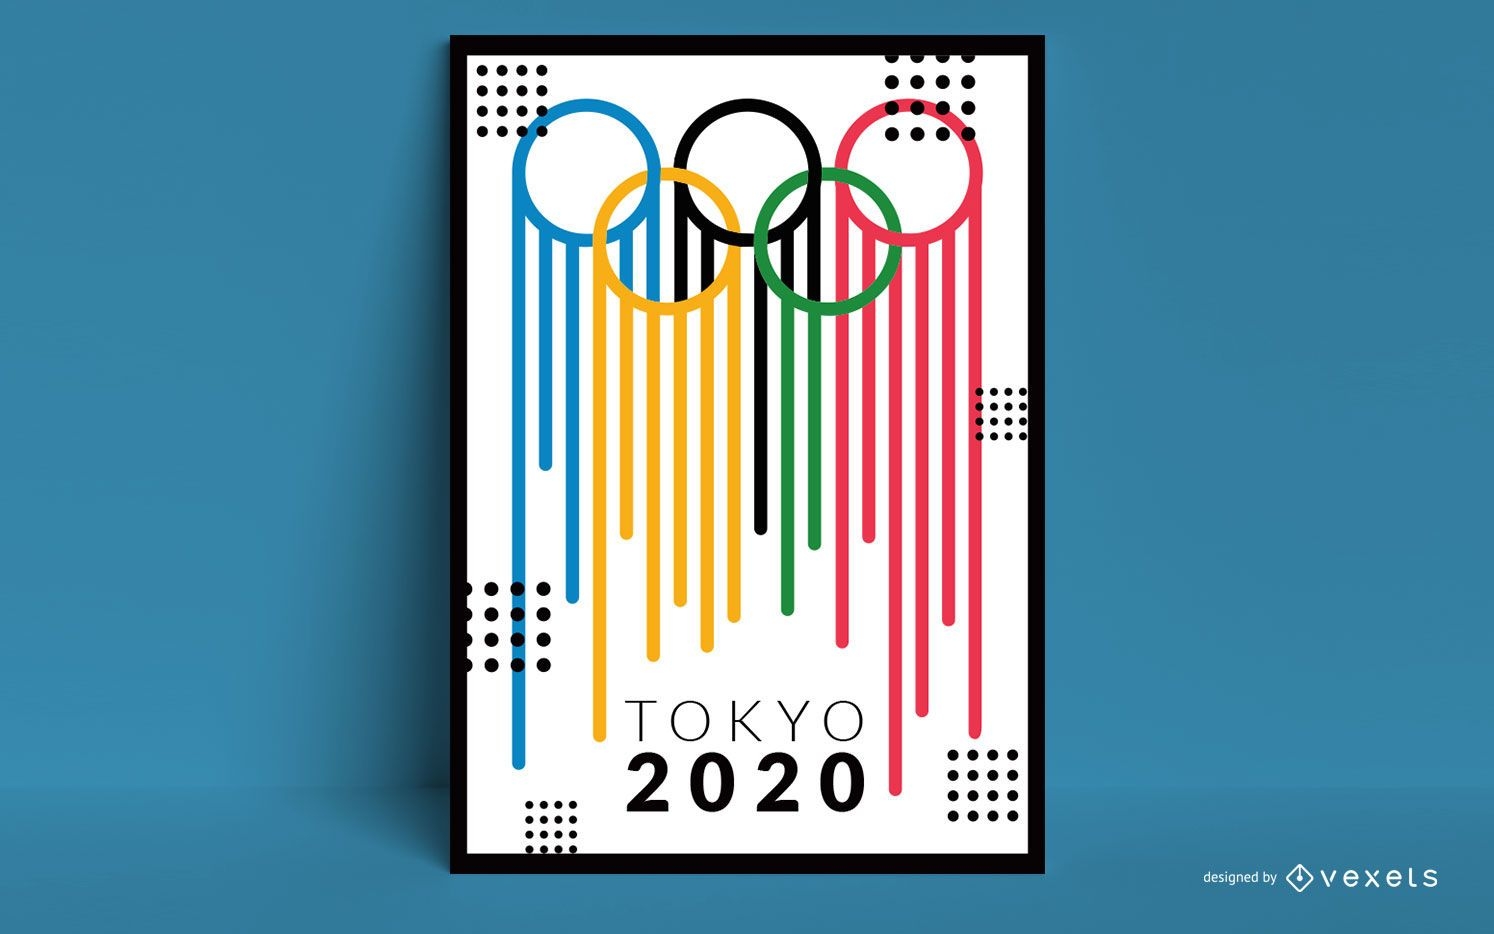 Creative Tokyo 2020 Olympic Games Poster Design